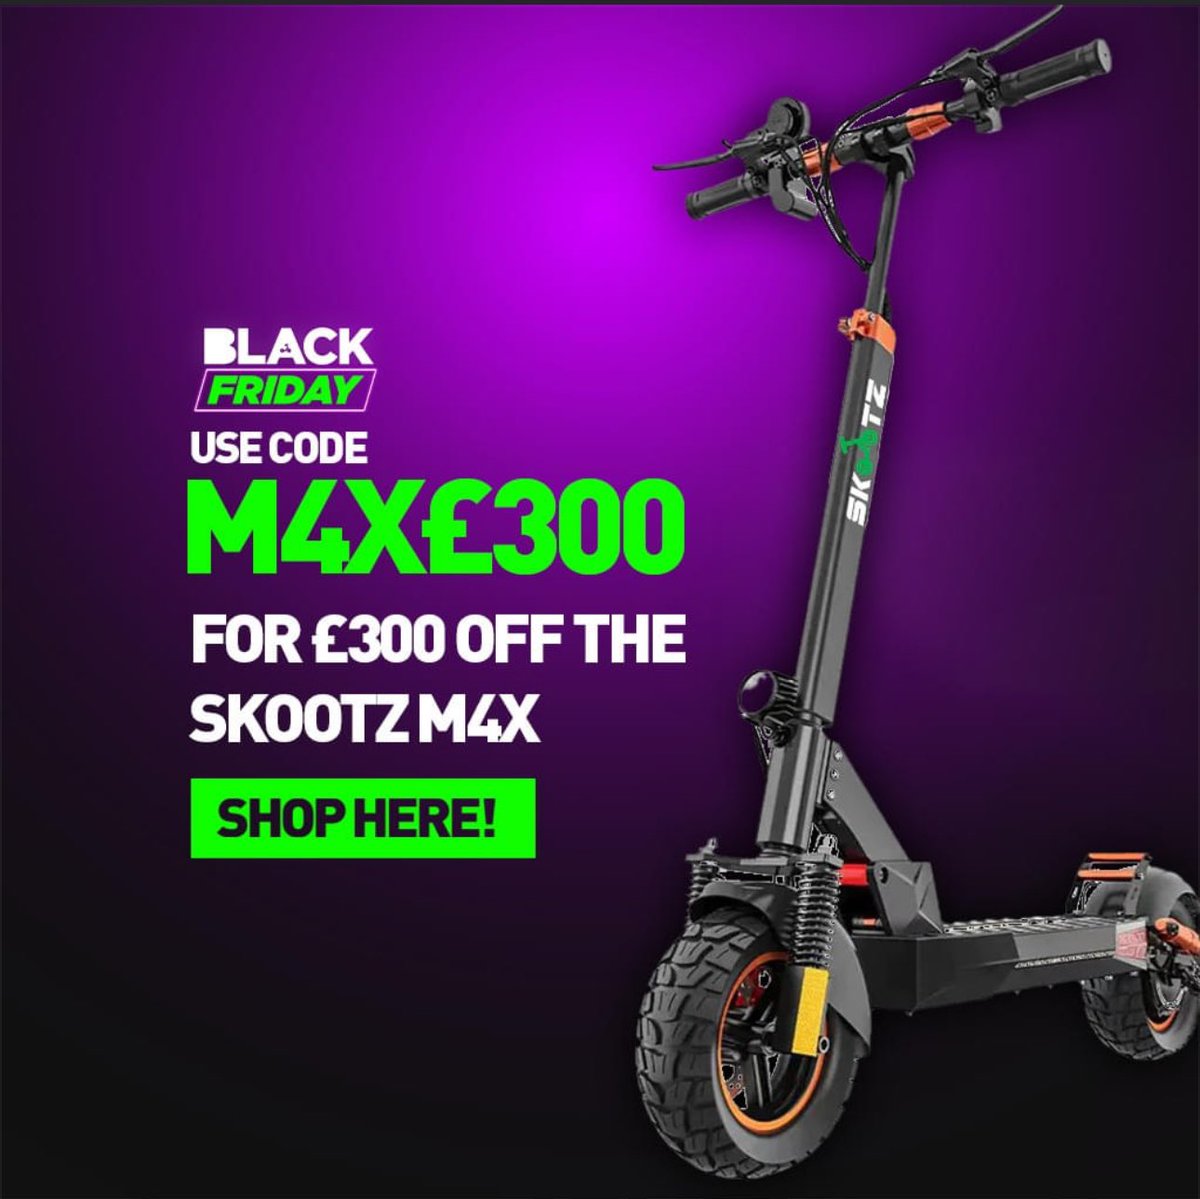 Early Access for Skootz Followers only. When they are gone they are gone.... SHOP HERE > skootz-electricscooters.com LIMITED TIME🚨 #skootz #skootzglasgow #skootzedinburgh